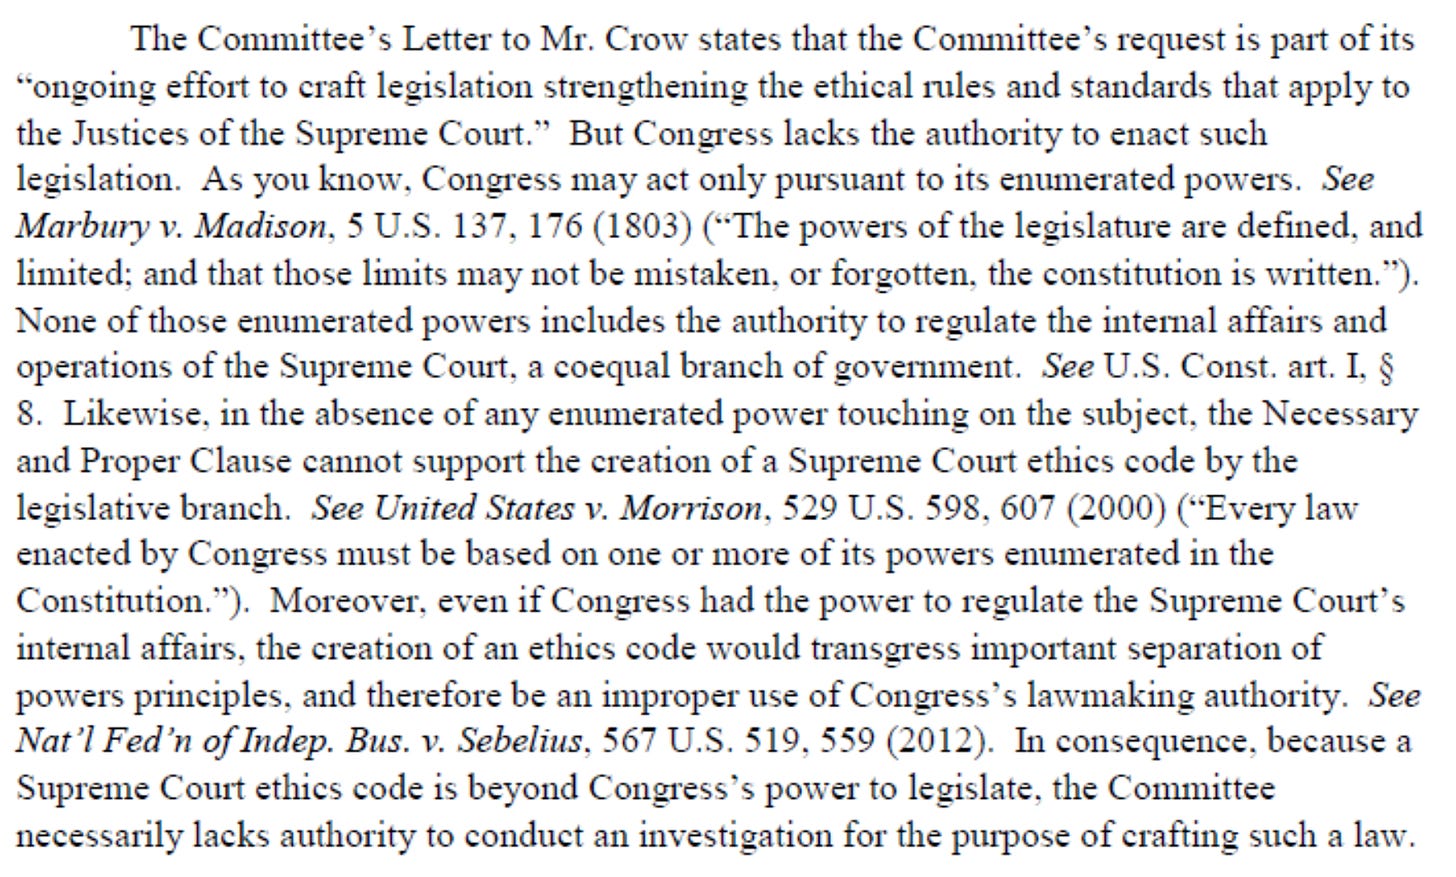 ‘TheCommittee’LettertoMr.Crow statesthattheCommitteesrequestispartofits The Committee's Letter to Mr. Crow states that the Committee's request is part of its “o "o n n g g o o i in n g ge e f f f fo or rt tt to oc c r ra af ft tl le e g gi is s l l a a t t io io n ns s t tr r e e n n g g t t h h e e n n i i n n g gt th h e ee e t th hi ic c a a l lr ru u l l e e s sa an n d ds s t ta a n n d d a a r r d d s st th h a a t ta a p p p p l ly yt to o theJusticesoftheSupremeCourt.” ButCongresslackstheauthoritytoenactsuch the Justices of the Supreme Court." But Congress lacks the authority to enact such L le e g gi is s l l a a t t i i o o n n . .A A s s y y o ou uk k n n o o w w . , C C o o n n g g r r e e s s s s m m a a y y a a c c t t o o n n l ly yp p u u r r s s u u a a n n t t t to ot its se e n n u u m m e e r r a a t te e d dp p o o w w e e r r s s . . S S e e e e M M ar ar b b u u r ry yv .v .M M ad ad i i s so o n n , .5 5 U U . .S S . . 1 1 3 3 7 7 , .1 17 7 6 6( (1 1 8 8 0 0 3 3) ) ( (" “ T T h h e ep p o o w w e e r r s s of of t th h e el le e g gi is s l l a a t t u u r r e ea ar r e ed d e e f fi i n n e e d d , .a an n d d l li i m mi i t te e d d: ; a an n d dt th ha a t t t th h o o s s e el li i m mi i t ts sm m a a y y n n o o t t b be em m i i s s t ta a k k e e n n , .o o r r f fo or rg g o ot tt t e e n n , .t th h e ec c o o n n s s t t i it t u u t t i i o o n ni is sw w r r i i t t t te e n n. ." ” ) ) . . N N o o n ne eo o f f t t h h o o s s e e e e n n u u m m e e r r a a t te e d dp p o o w w e e r rs si in n c c l l u u d d e e s st th h e ea a u u t t h h o o r r i it t y yt to or re e g gu u l la a t t e et th h e ei in n t t e e r m n a a l l a a f f f fa ai ir r s sa an n d d o o p p e e r r a a t ti i o o n n s so o f f t th h e eS S u u p pr r e e m m e eC C o o u u r r t t, ,a a c c o o e e q q u u a a l l b b r r a a n n c ch ho o f f g g o o v v e e r rn n m me e n n t t. .Se Se e e U U . .S S . .C C o o n n s s t t. .a a r rt t . . , I I § § 8 8. .L L i i k k e e w w i i s se e , . i i n nt th h e ea ab bs se e n n c c e eo of fa an n y ye en nu u m m e e r r a a t te e d dp po o w we er rt to o u u c c h h i i n n g go on nt th h e es su ub b j je e c c t t , .t th h e eN N e e c c e e s s s sa a r r y y a an n d dP P r r o o p p e e r r C C l l a au u s s e ec ca a n n n n o o t ts su up p p p o o r rt tt th h e ec c r re ea a t ti i o o n no of fa a S S u u p p r re e m m e eC C o o u u r r t t e e t th hi ic c s sc c o od d e eb by yt th h e e L le eg g i i s s l la a t t i i v v e eb b r ra a n n c c h h . .S S e ee eU U n n i i t te e d dS S t t a a t te e s s . v v .M M or o r r i ri s so o n n , .5 5 2 29 9U U . .S S . .$ 59 9 8 5 , .6 60 0 7 7( (2 2 0 0 0 0 0 0 ) )( (" “ E E v v e e r r y yl law aw e e n n a a c c t te e d db by yC C o o n n g g r r e e s ss sm m u u s s t t b be eb b a a s se e d do on no o n ne eo o r r m m o o r r e e o of fi it t s sp p o o w w e e r r s s e e n n u u m m e e r r a a t te e d di in nt th h e e C C o o ns n t s i t t it u u t t i io on n . . ” " ) ). . Moreover,evenifCongresshadthepowertoregulatetheSupremeCourt's Moreover, even fi Congress had the power to regulate the Supreme Count's i in n t t e e r r n n a a l la a f f f f a a i ir r s s , .t th h e ec c r re e a a t t i i o o n no o f f a an ne e t th hi ic c s sc co o d d e ew w o o u u l ld dt tr r a a n n s s g g r r e e s s s si im mp p o o r r t ta a n n t t s s e e p pa a r ra a t t i i o o n no of f ‘ p p o o w we e r rs sp p r r i in n c c i i p p l l e e s s , ,a an n d dt th h e e r r e e f f o o r r e eb be ea an ni im mp p r ro o p p e e r ru u s se co o f fC Co o n n g g r r e e s s s s ' 's sl la a w w m ma a k k i in n g ga a u u t t h h o o r r i it t y y . .S S e ee e N N at a ' t' l l F F e e d d ' 'n no o f f I In n d d e e p p . .B B u u s s. .v .v .S S e e b b e e l l i iu u s s , ,5 5 6 67 7U U . .S S . .$ 5 1 19 9 , ,5 55 5 9 9( (2 2 0 0 1 1 2 2 ) ) . .I nI nc c o o n n s se e q q u u e e n n c c e e , ,b b e e c ca a u u s s e ea a S S u u p p r re e m m e eC C o o u u r r t t e e t th hi ic c s sc co o d d e ei is sb b e ey y o o n n d d C Co o n n g g r r e e s s s s ' 's sp po o w we e r r t to ol le eg g i is s l l a a t t e e , ,t th h e eC C o o m m mi m t i t t e te e e : ‘ n n e e c c e e s s s s a a r r i i l l y yl la a c c k k s sa a u u t th ho o r ri i t t y yt to oc c o o n n d d u u c c t t a an ni in nv v e e s s t ti i g g a a t t i i o o n nf fo o r rt th h e e p pu u r rp p o os se eo o f f c c r r a a f f t t i in n g gs su u c c h ha a l la a w w . .